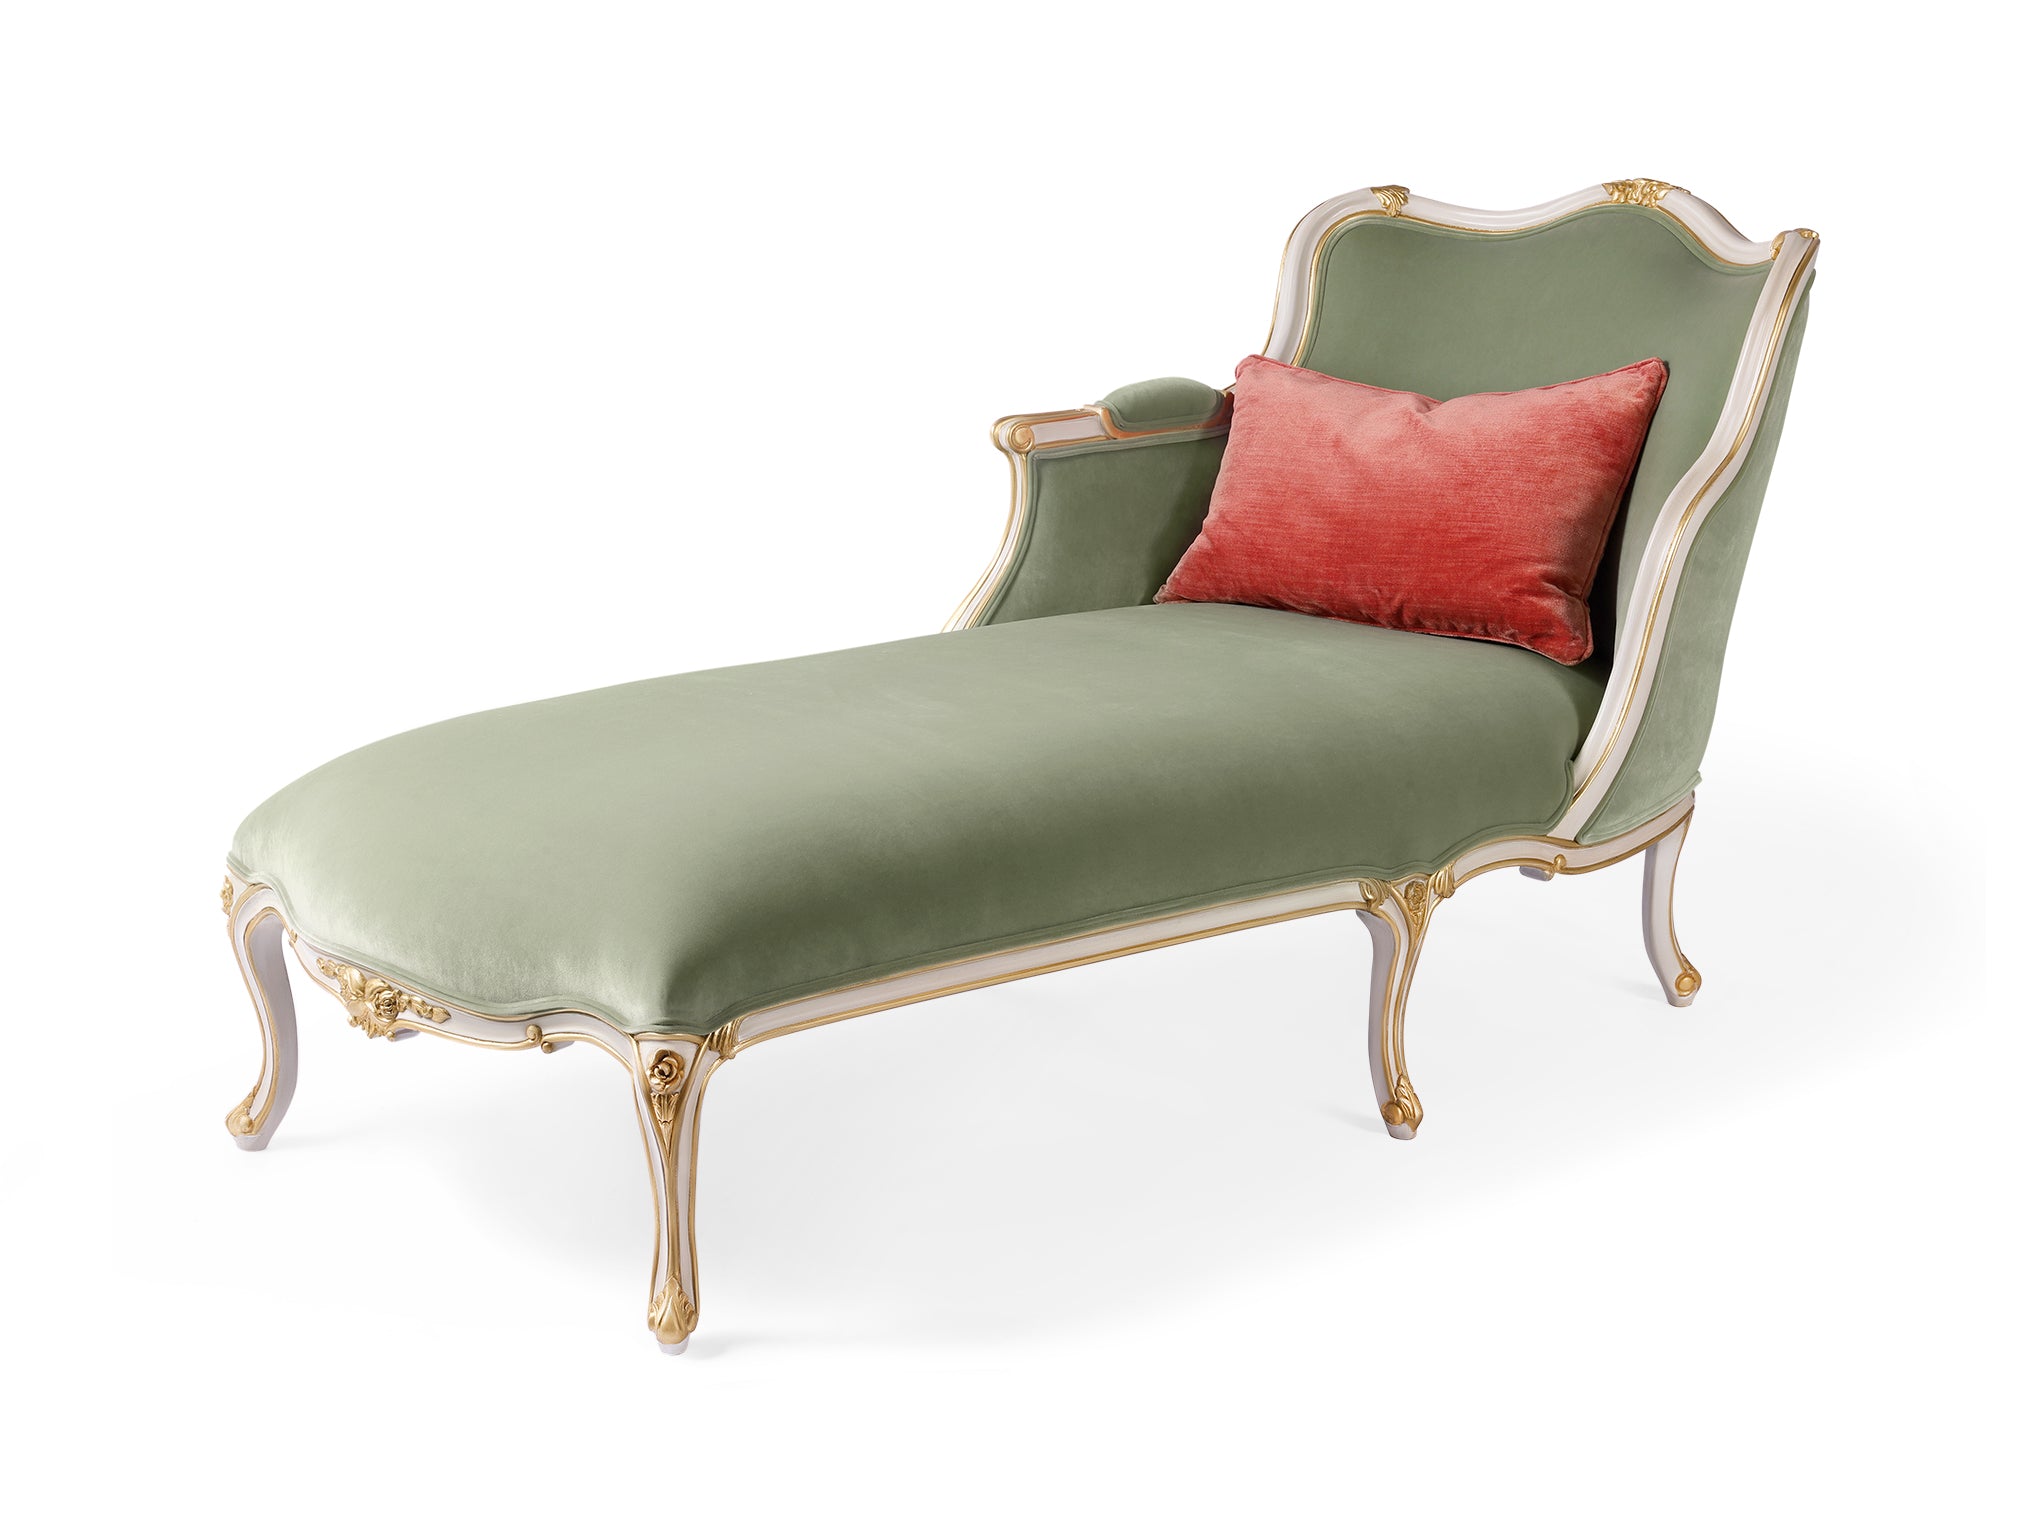 Rocaille Upholstered Mahogany Chaise